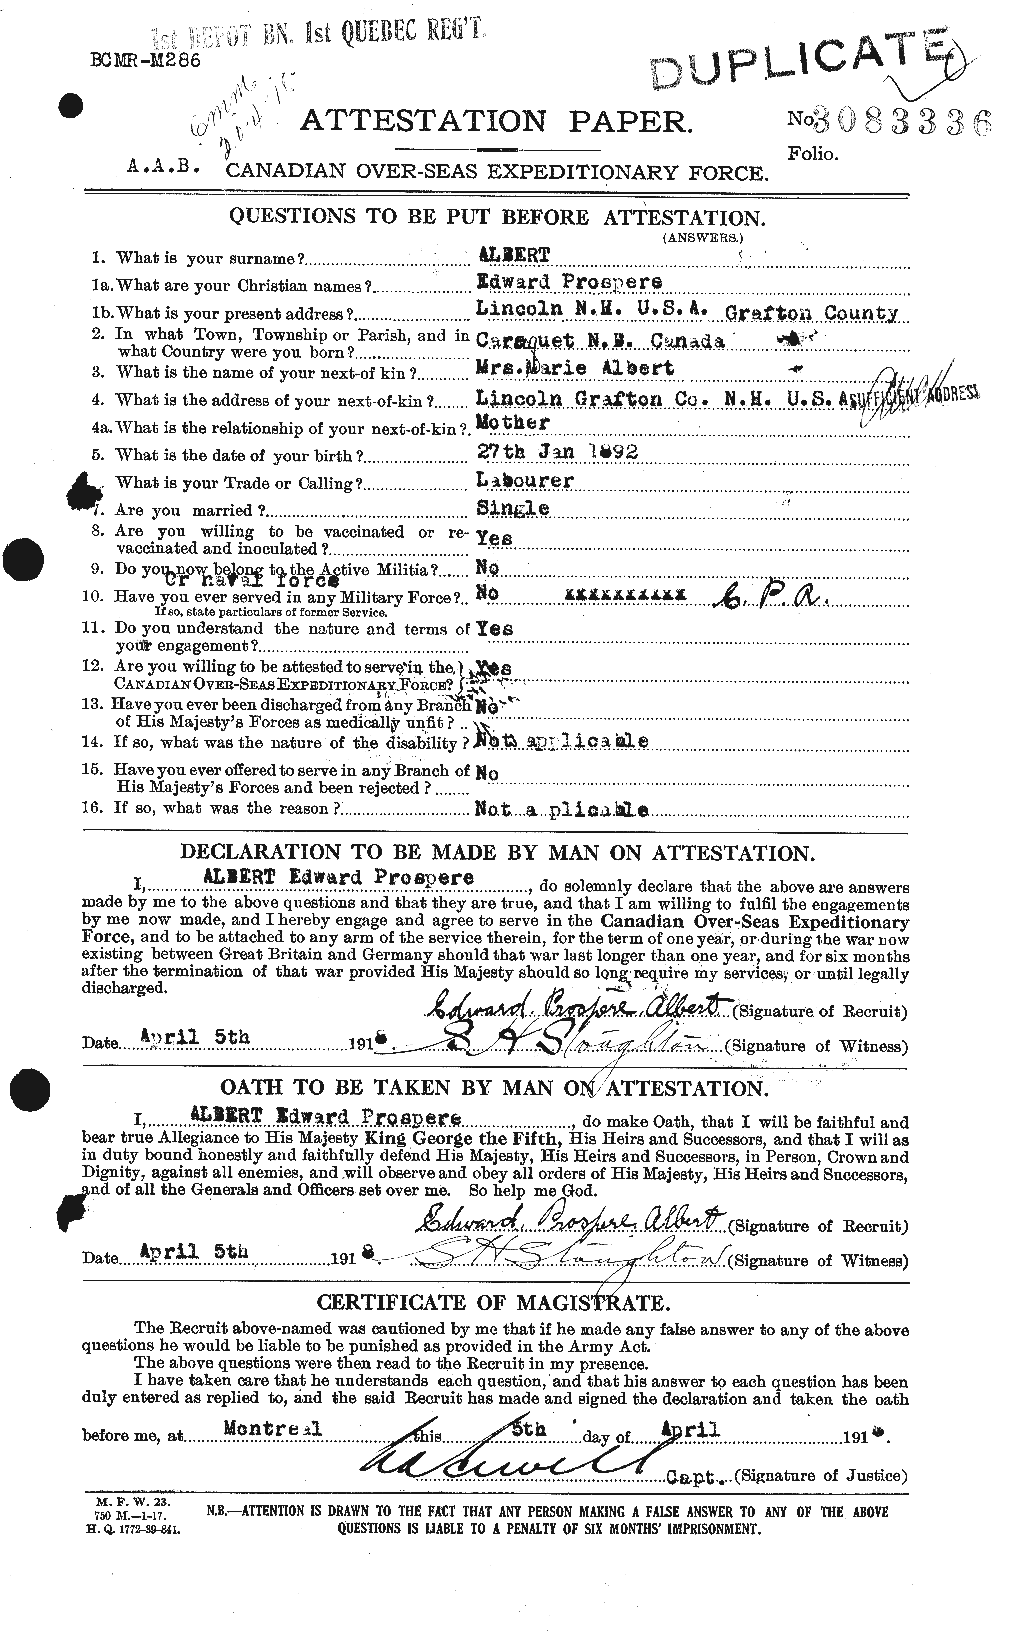 Personnel Records of the First World War - CEF 204576a